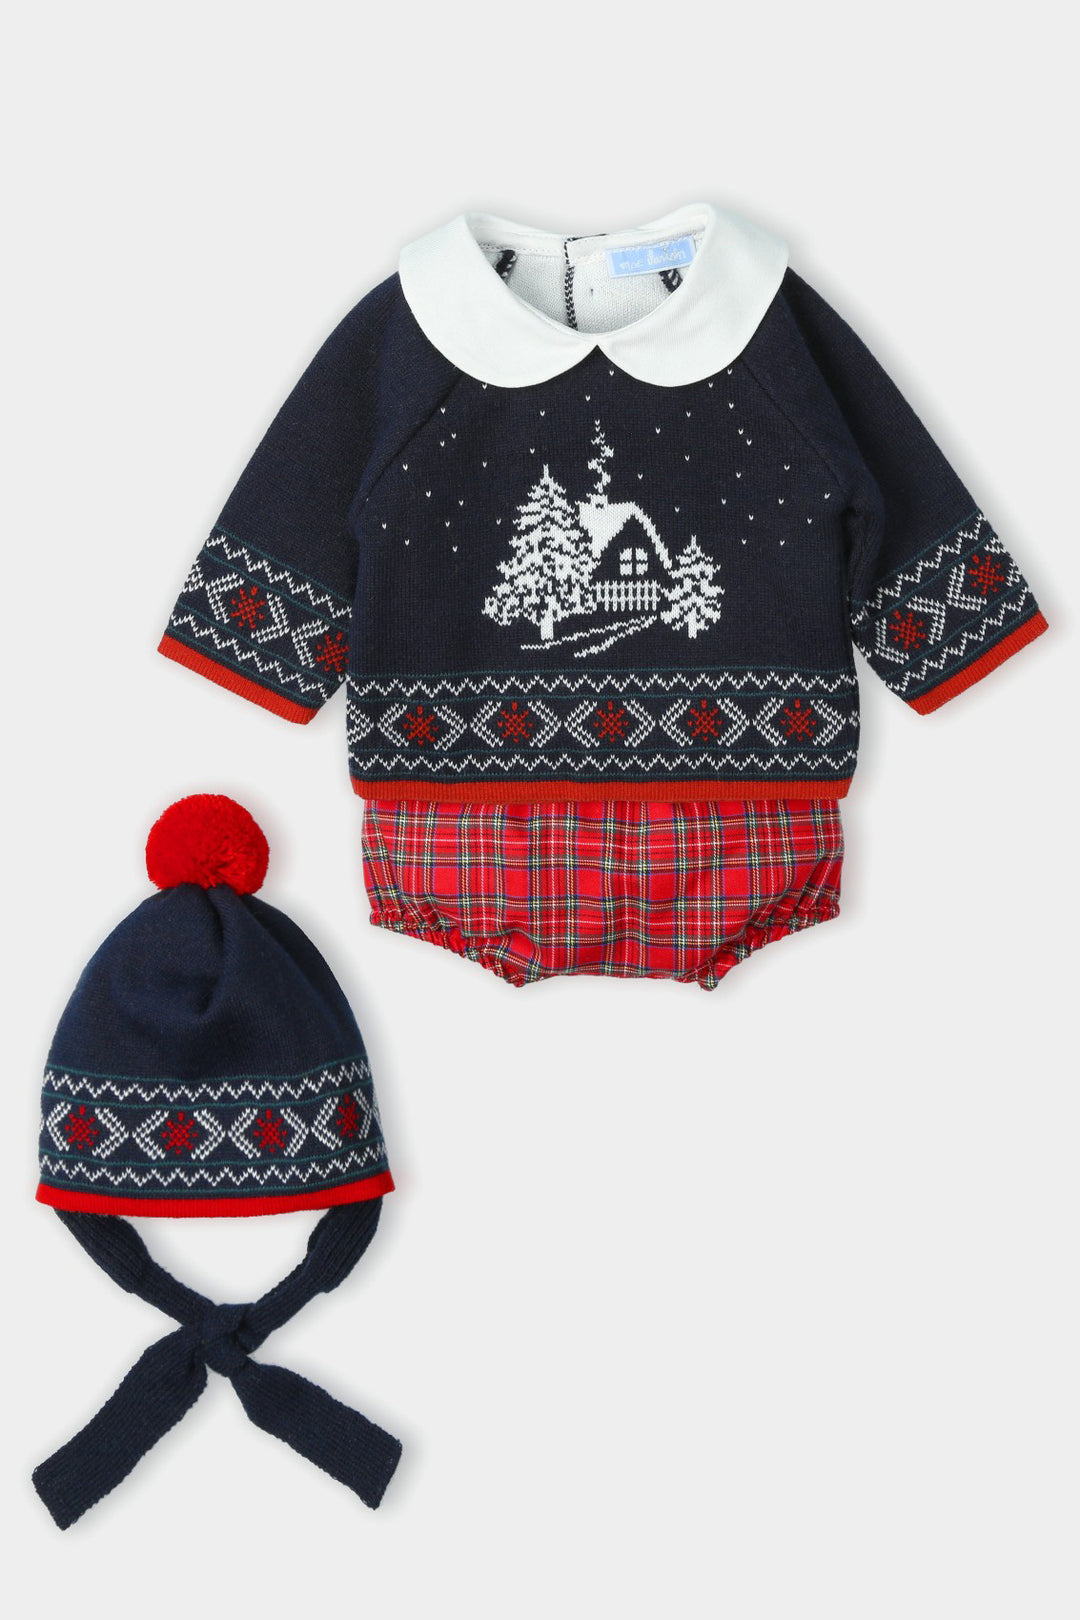 Mac Ilusión PREORDER "Leopold" Navy & Red Knit Tartan Outfit Set | Millie and John